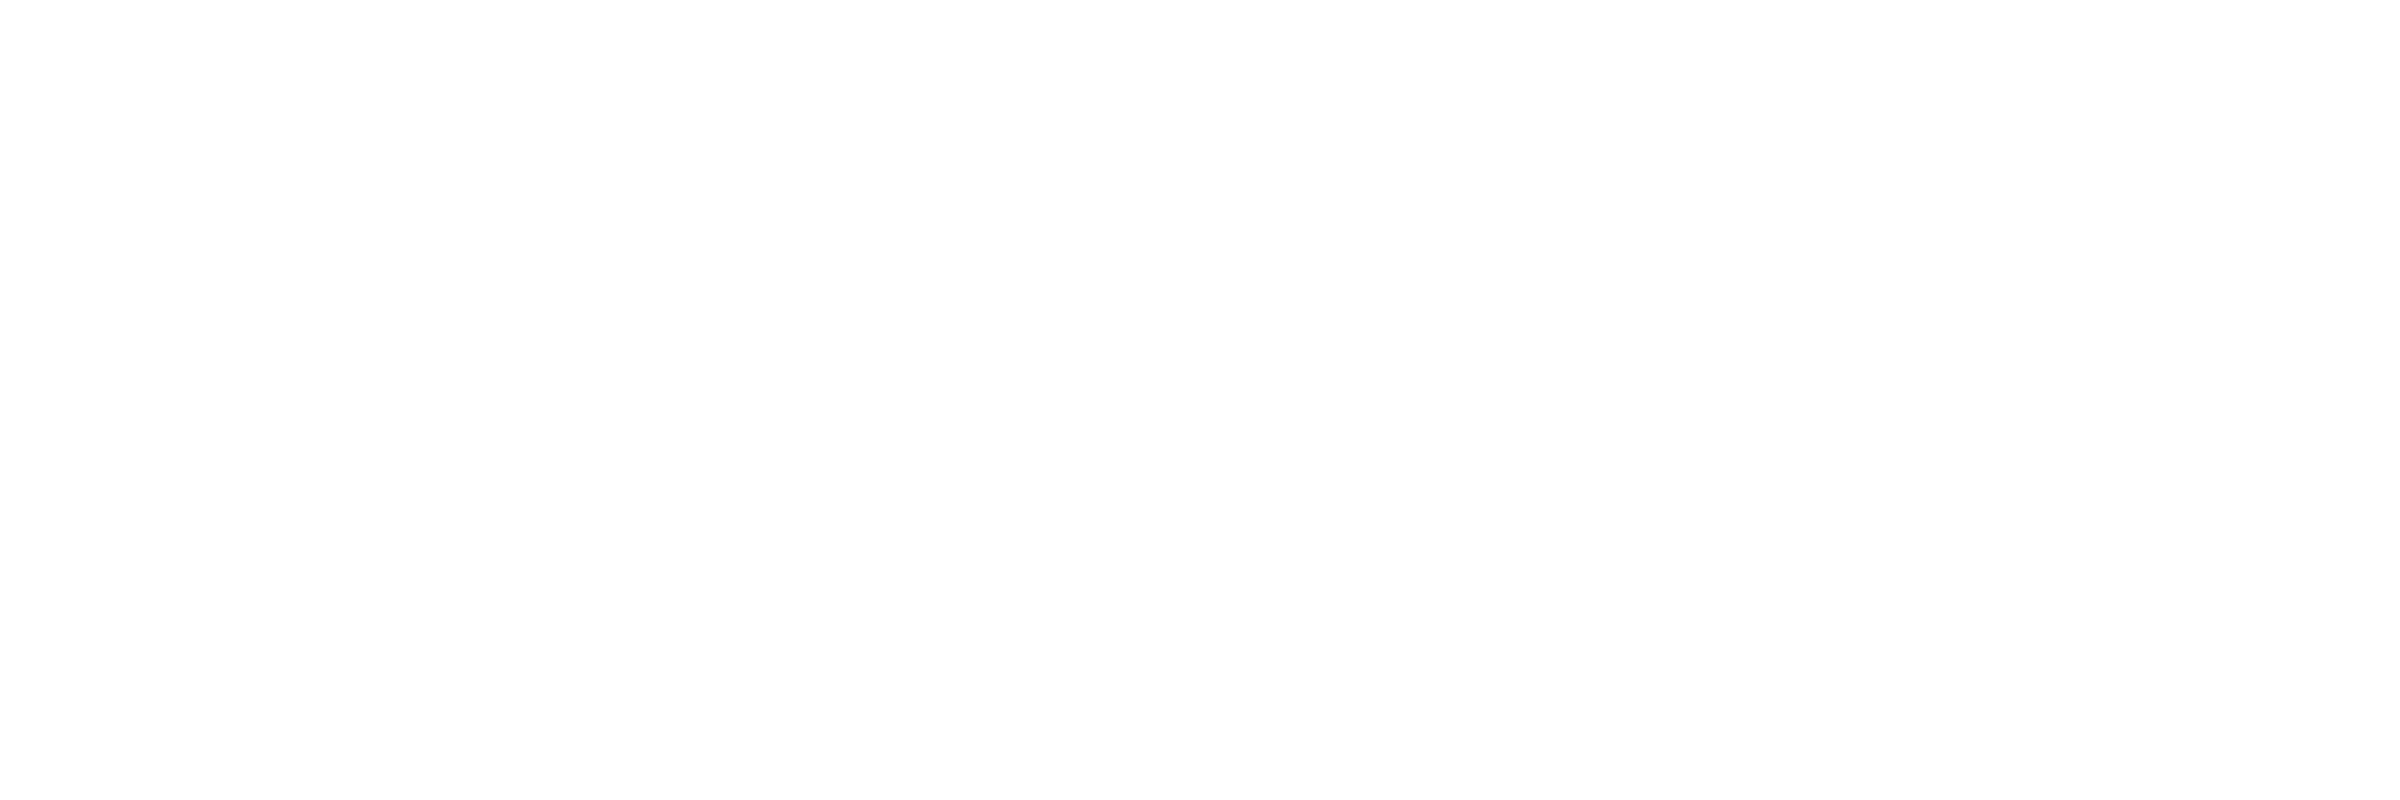 Sleepabused - bodyright - Own your body online | Bodily Integrity | UNFPA